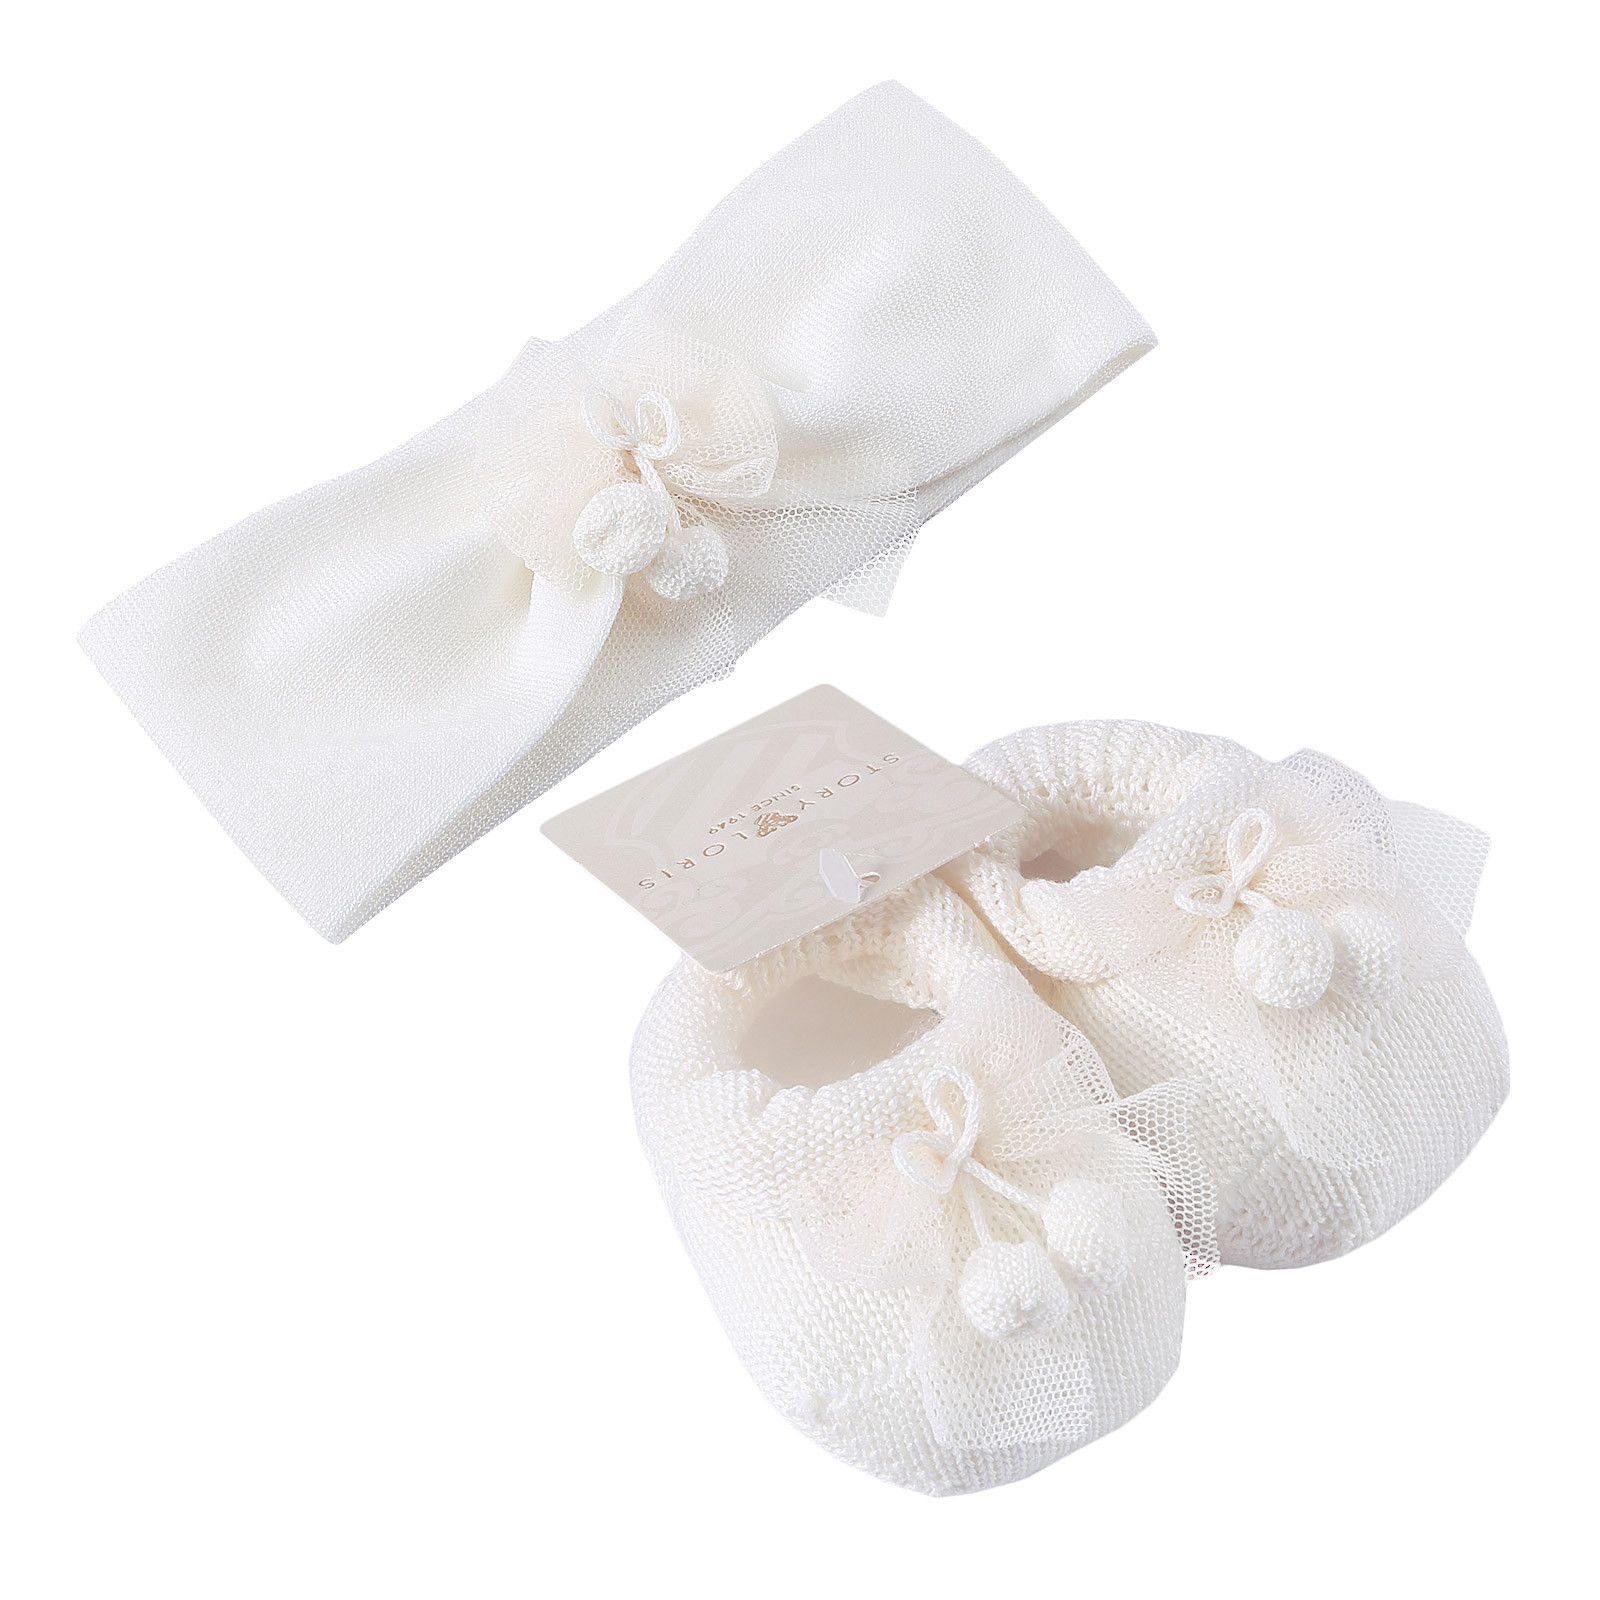 Baby White Knitted Cotton Shoes&Hair Band Gift Set - CÉMAROSE | Children's Fashion Store - 1